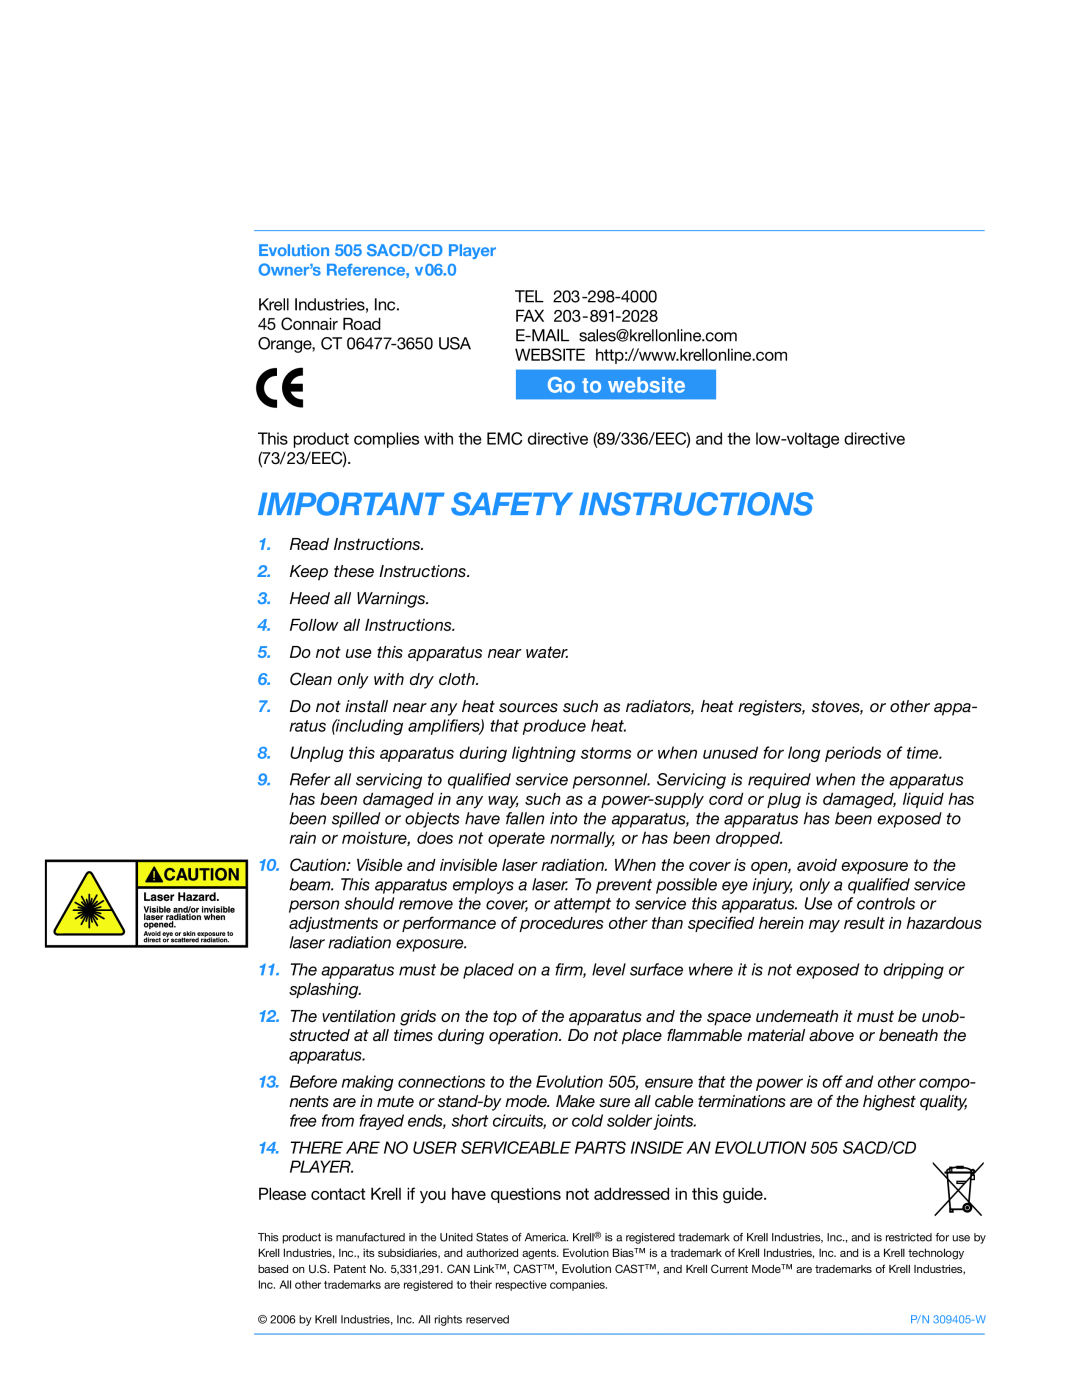 Krell Industries Evolution 505 manual Important Safety Instructions, Go to website 